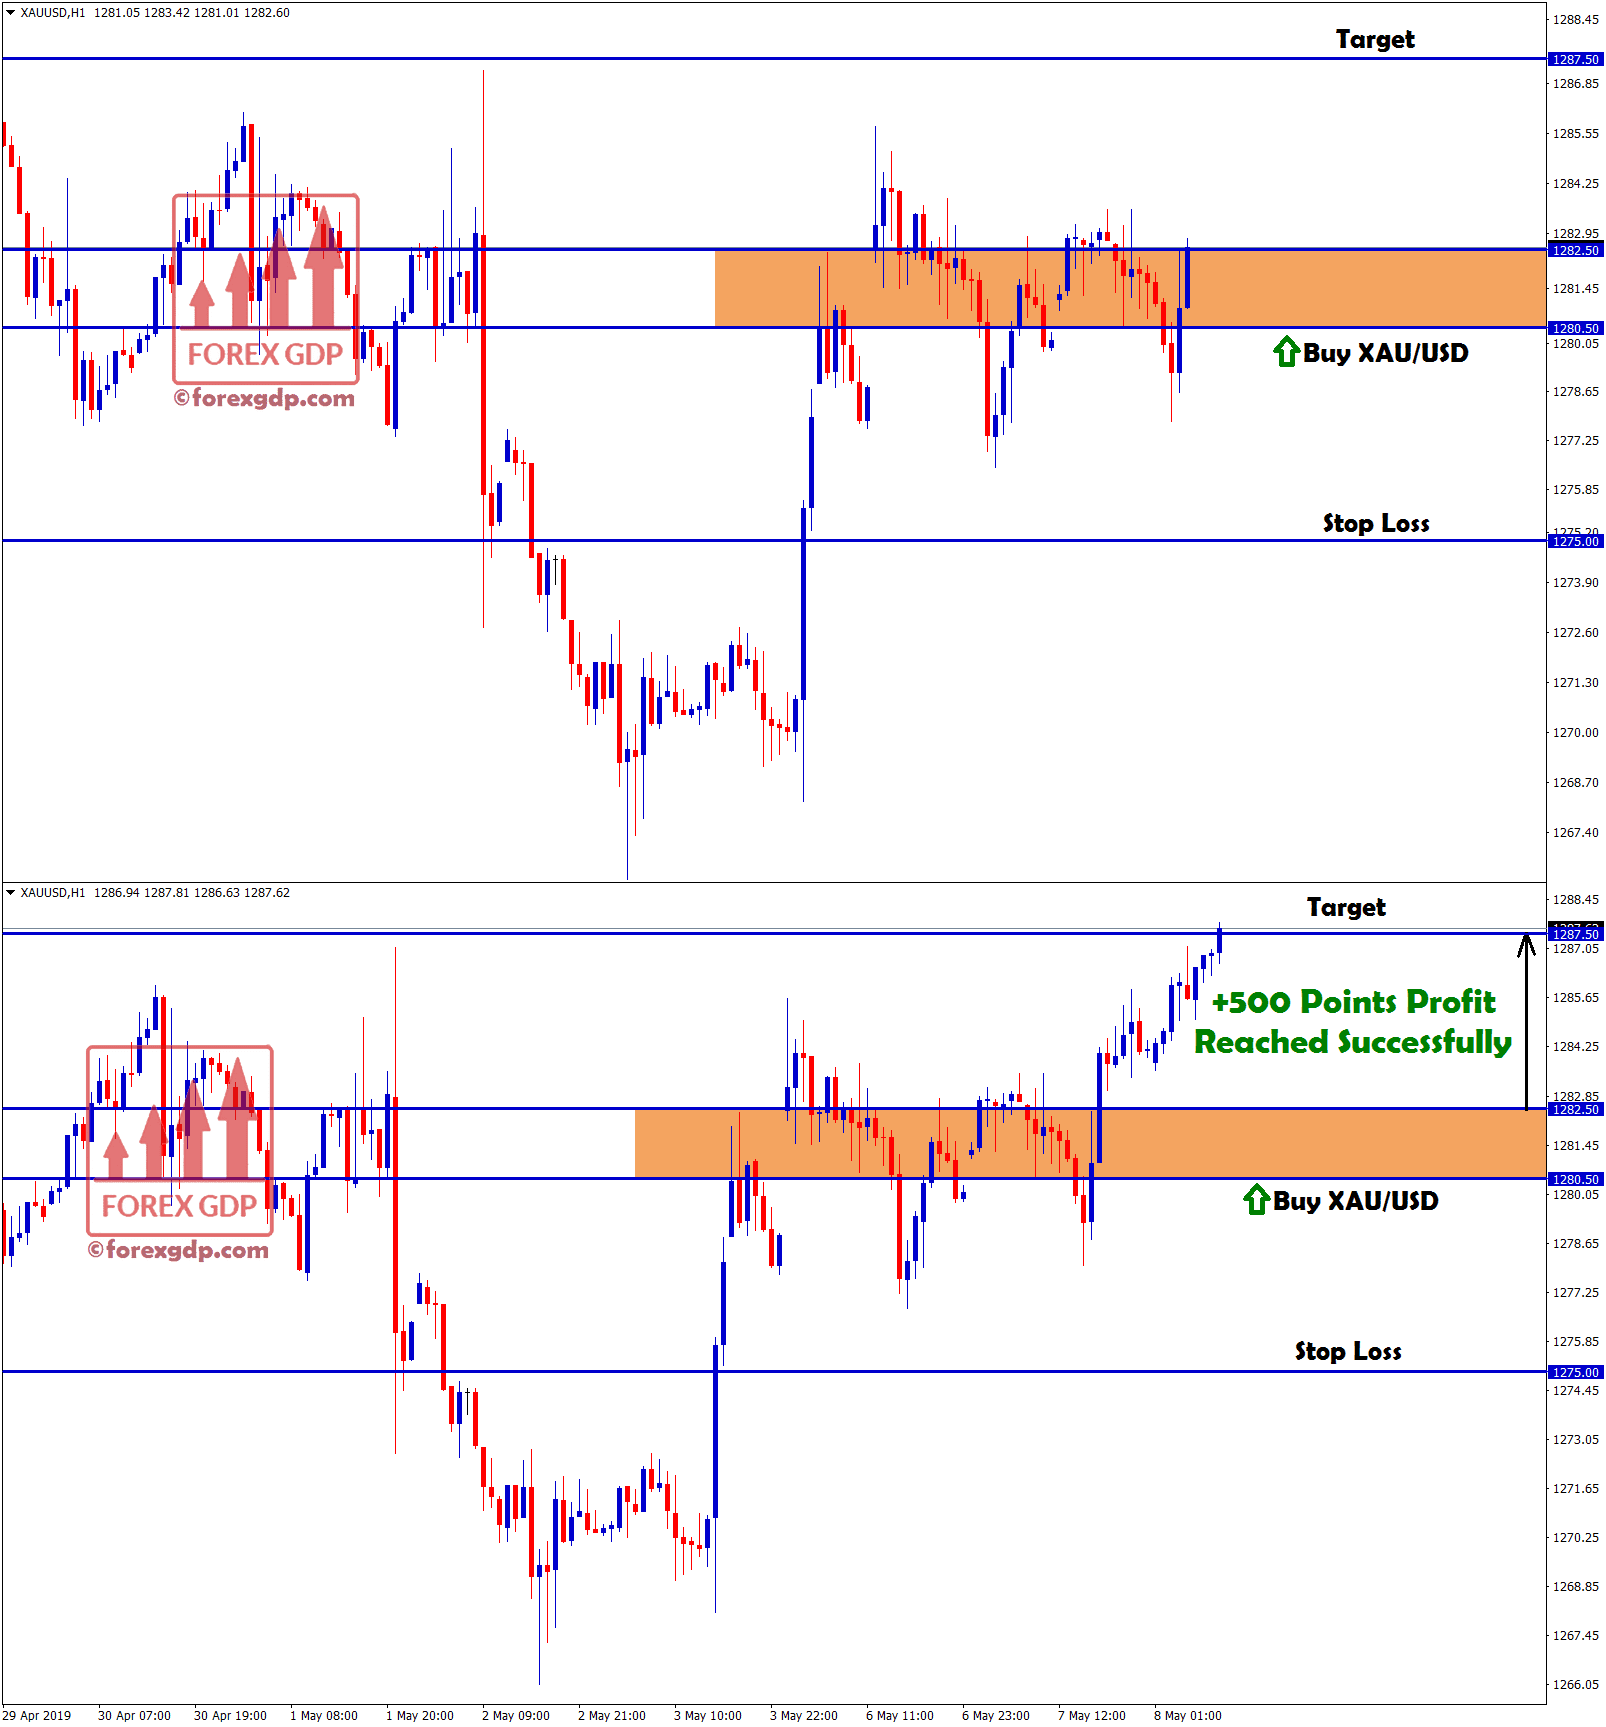 gold buy signal reached profit with +500 points